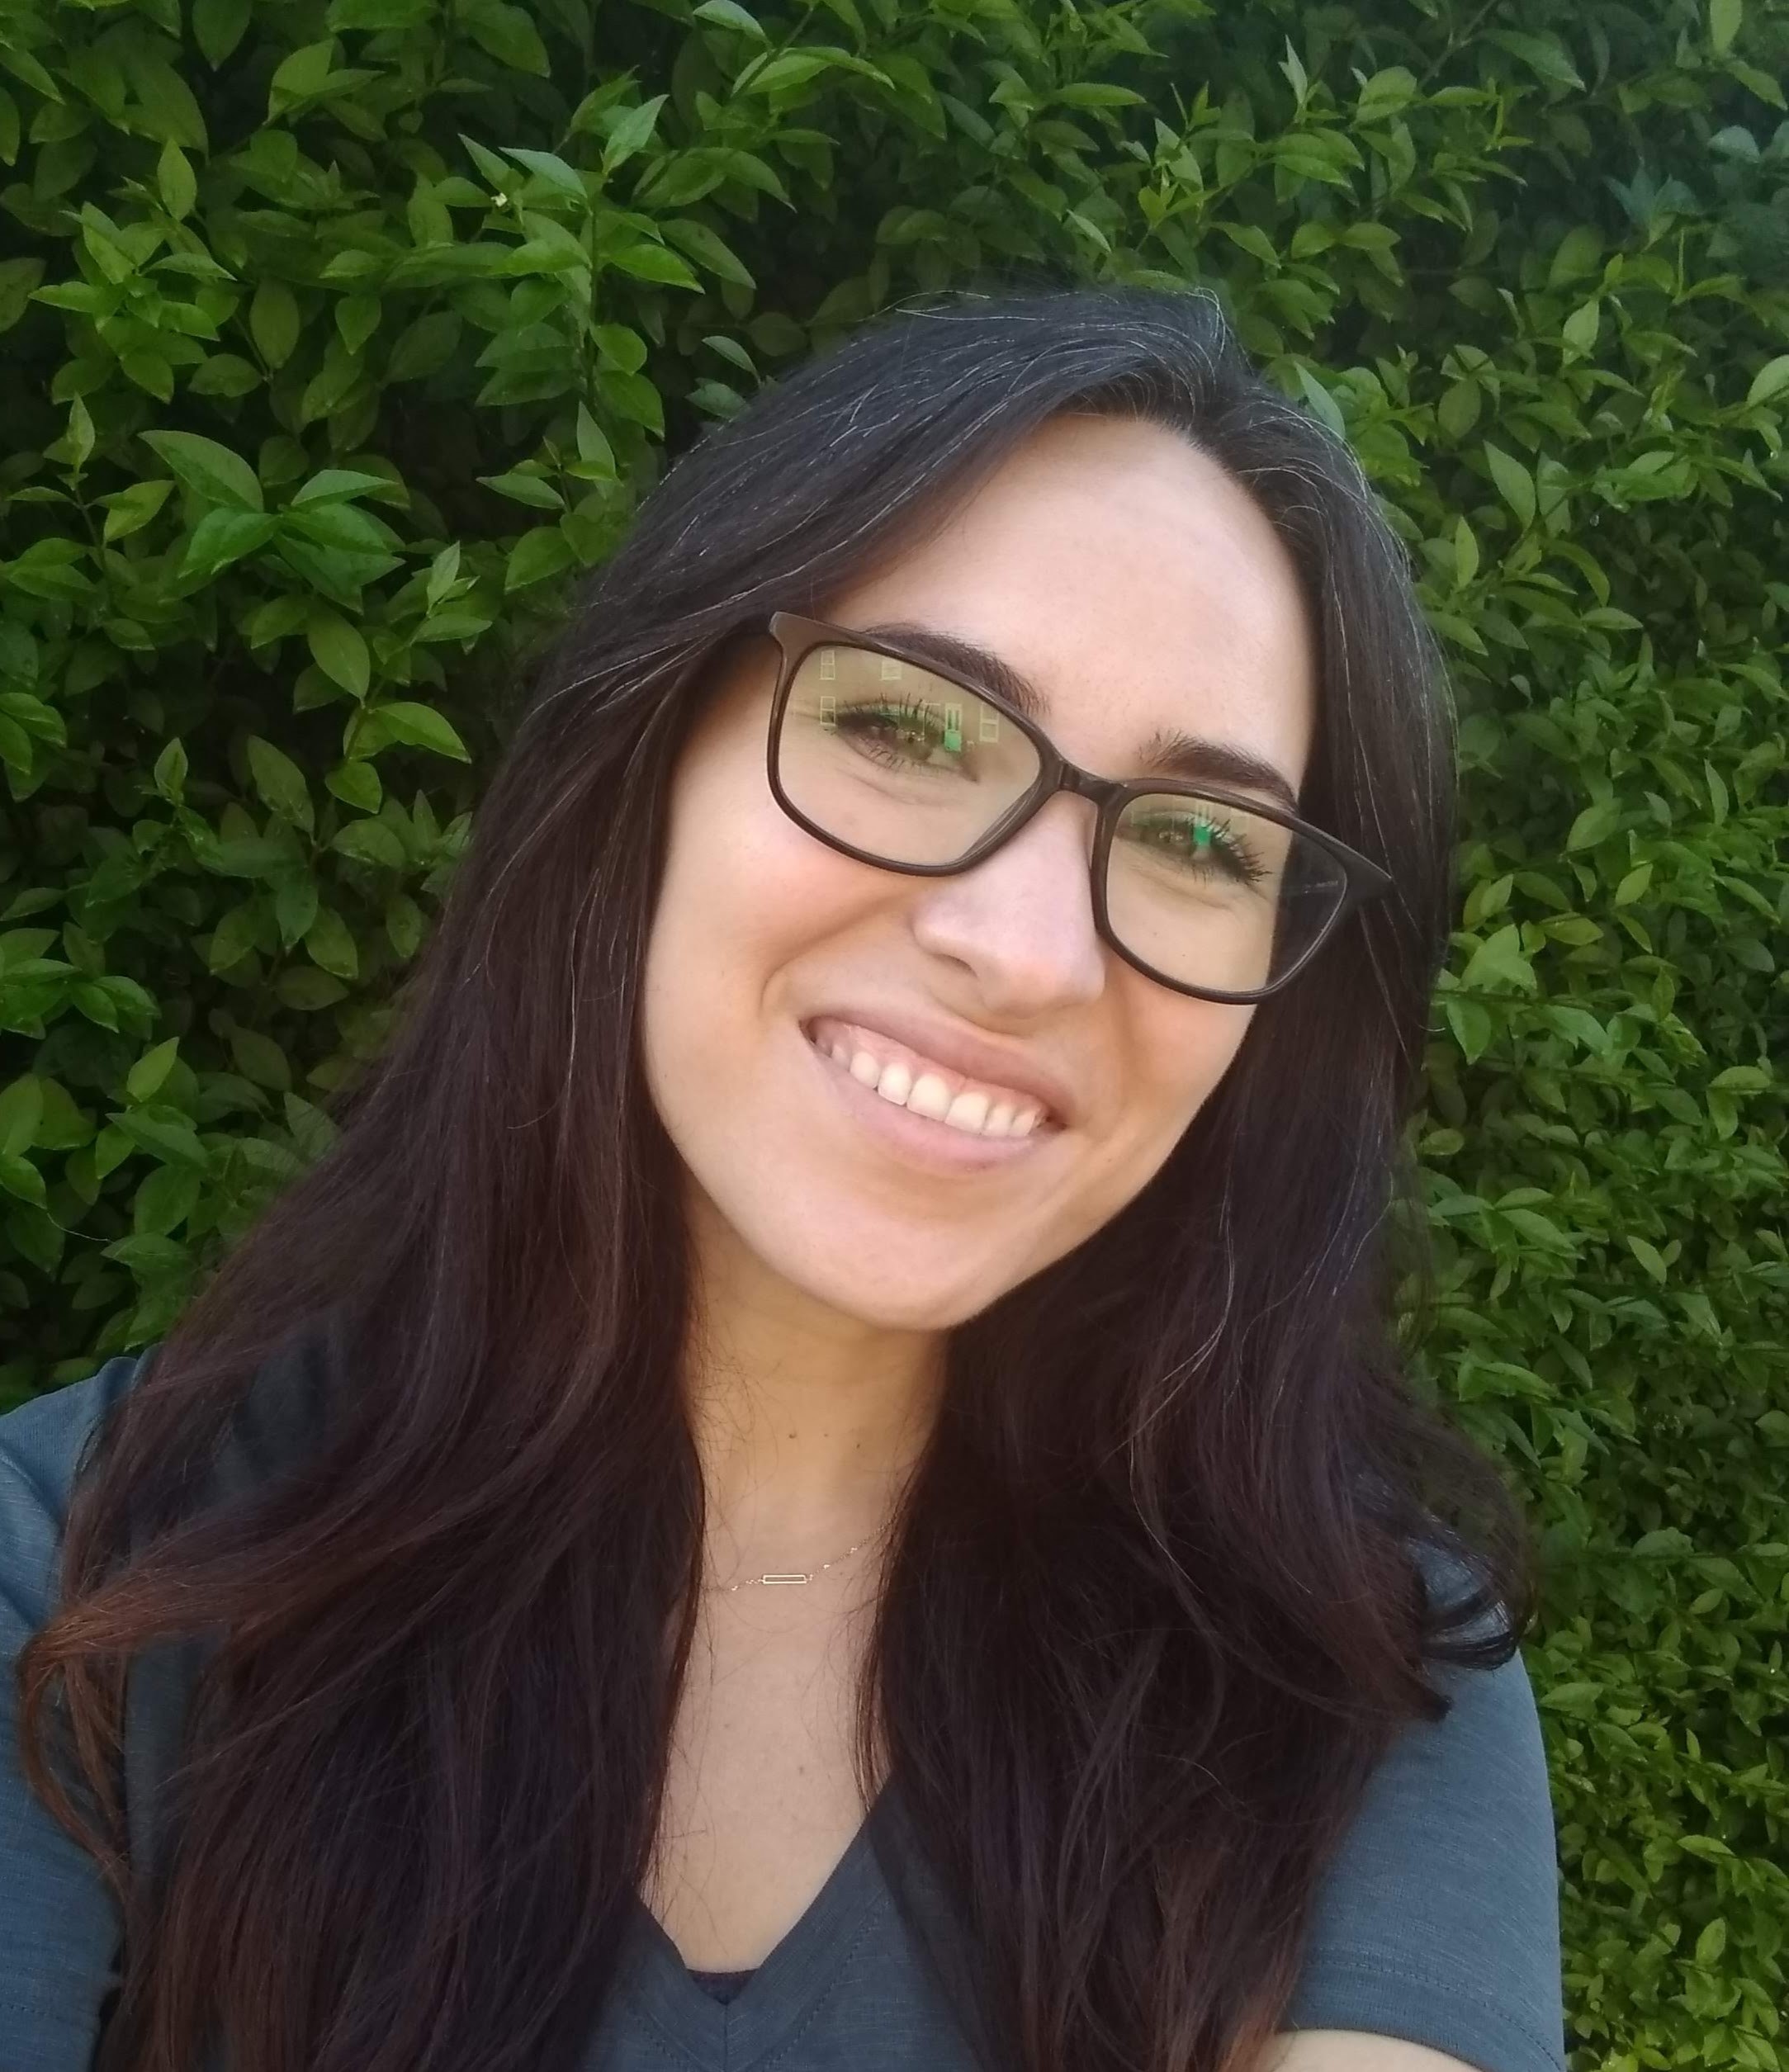 Spotlight Series: Tiffany Moeller, Engineering Manager, Trust & Safety Engineering, at Cloudflare